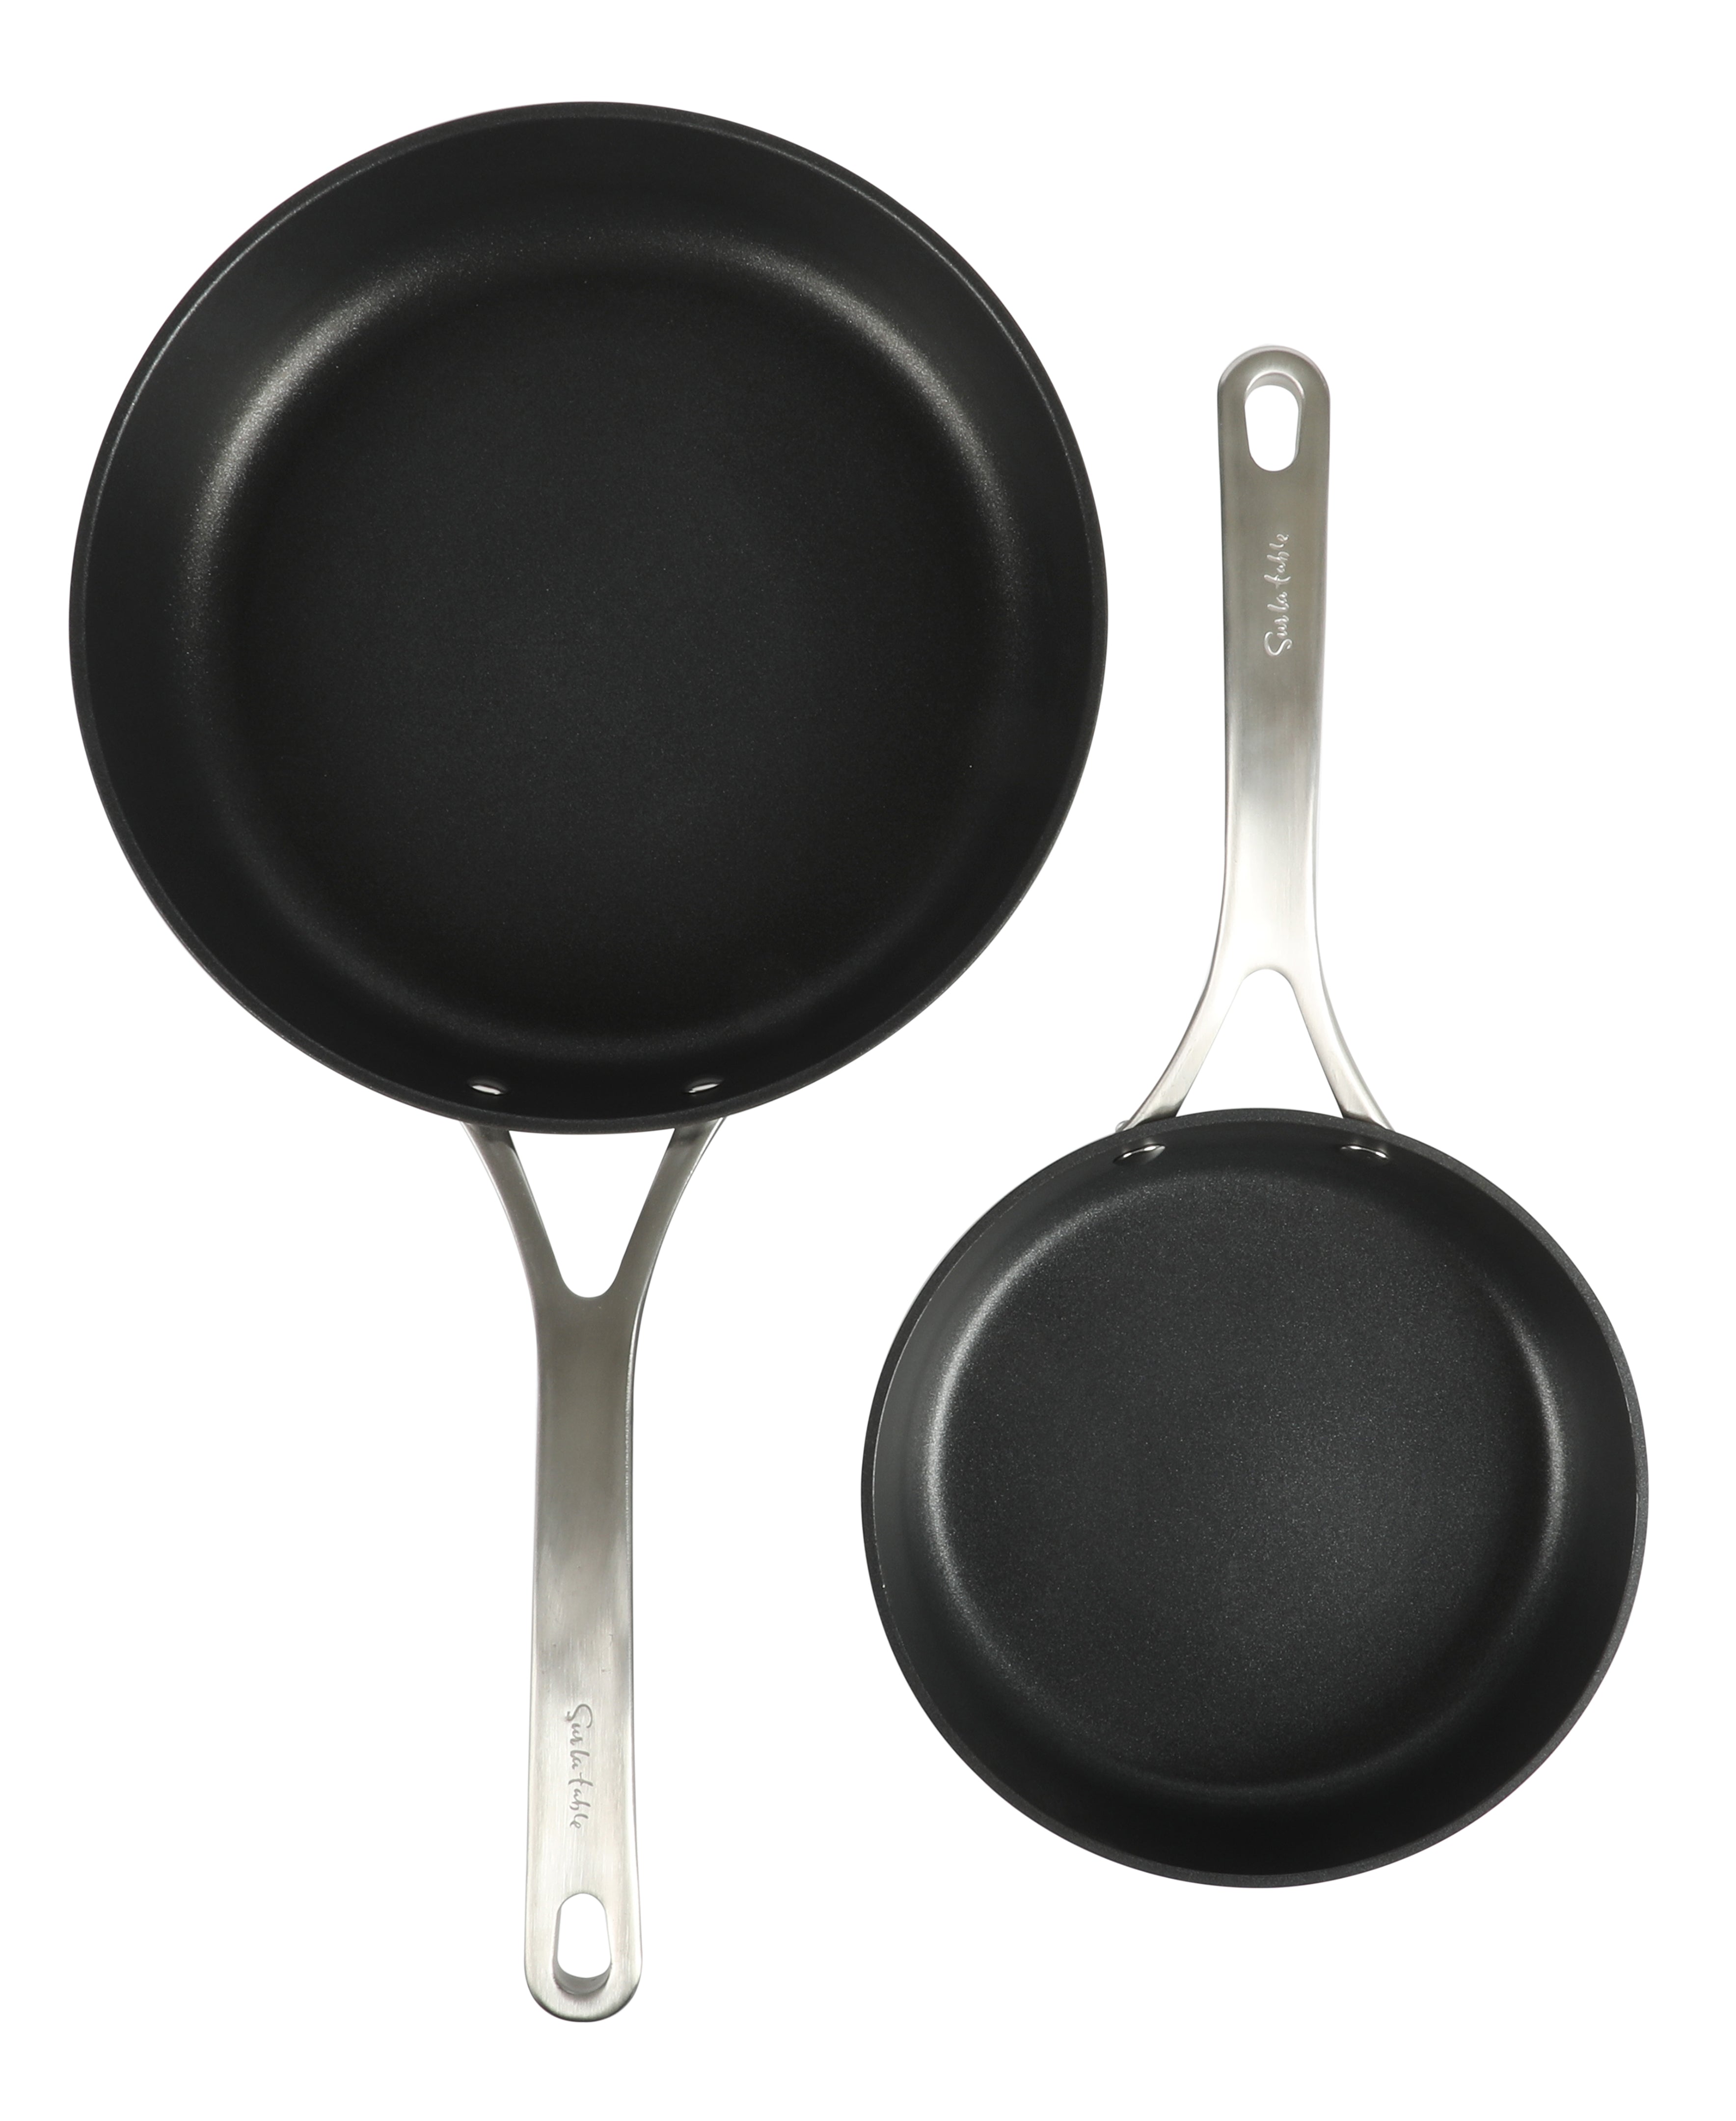 T-Fal Ultimate Hard Anodized Black Saute Pan, 12 in - City Market